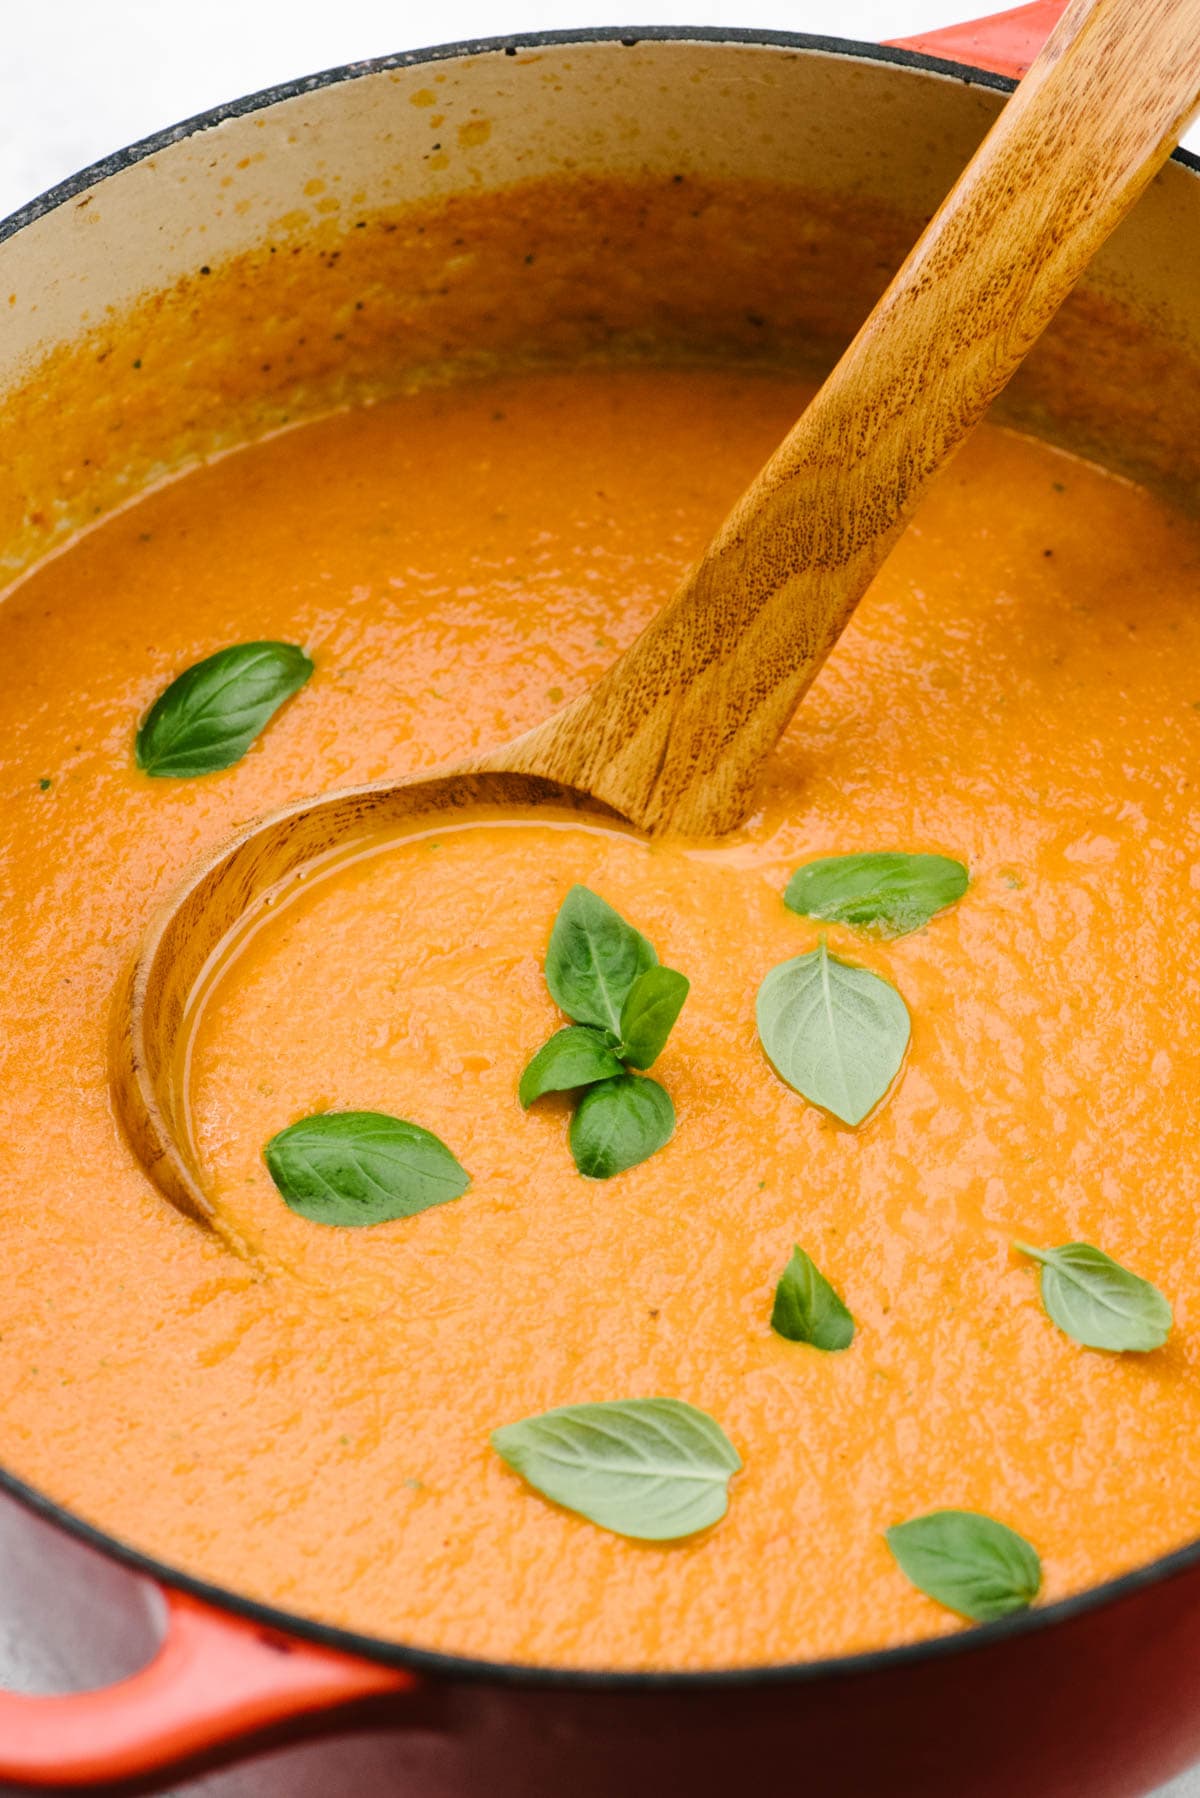 Side view, a ladle tucked into a pot of tomato basil soup garnished with whole basil leaves.